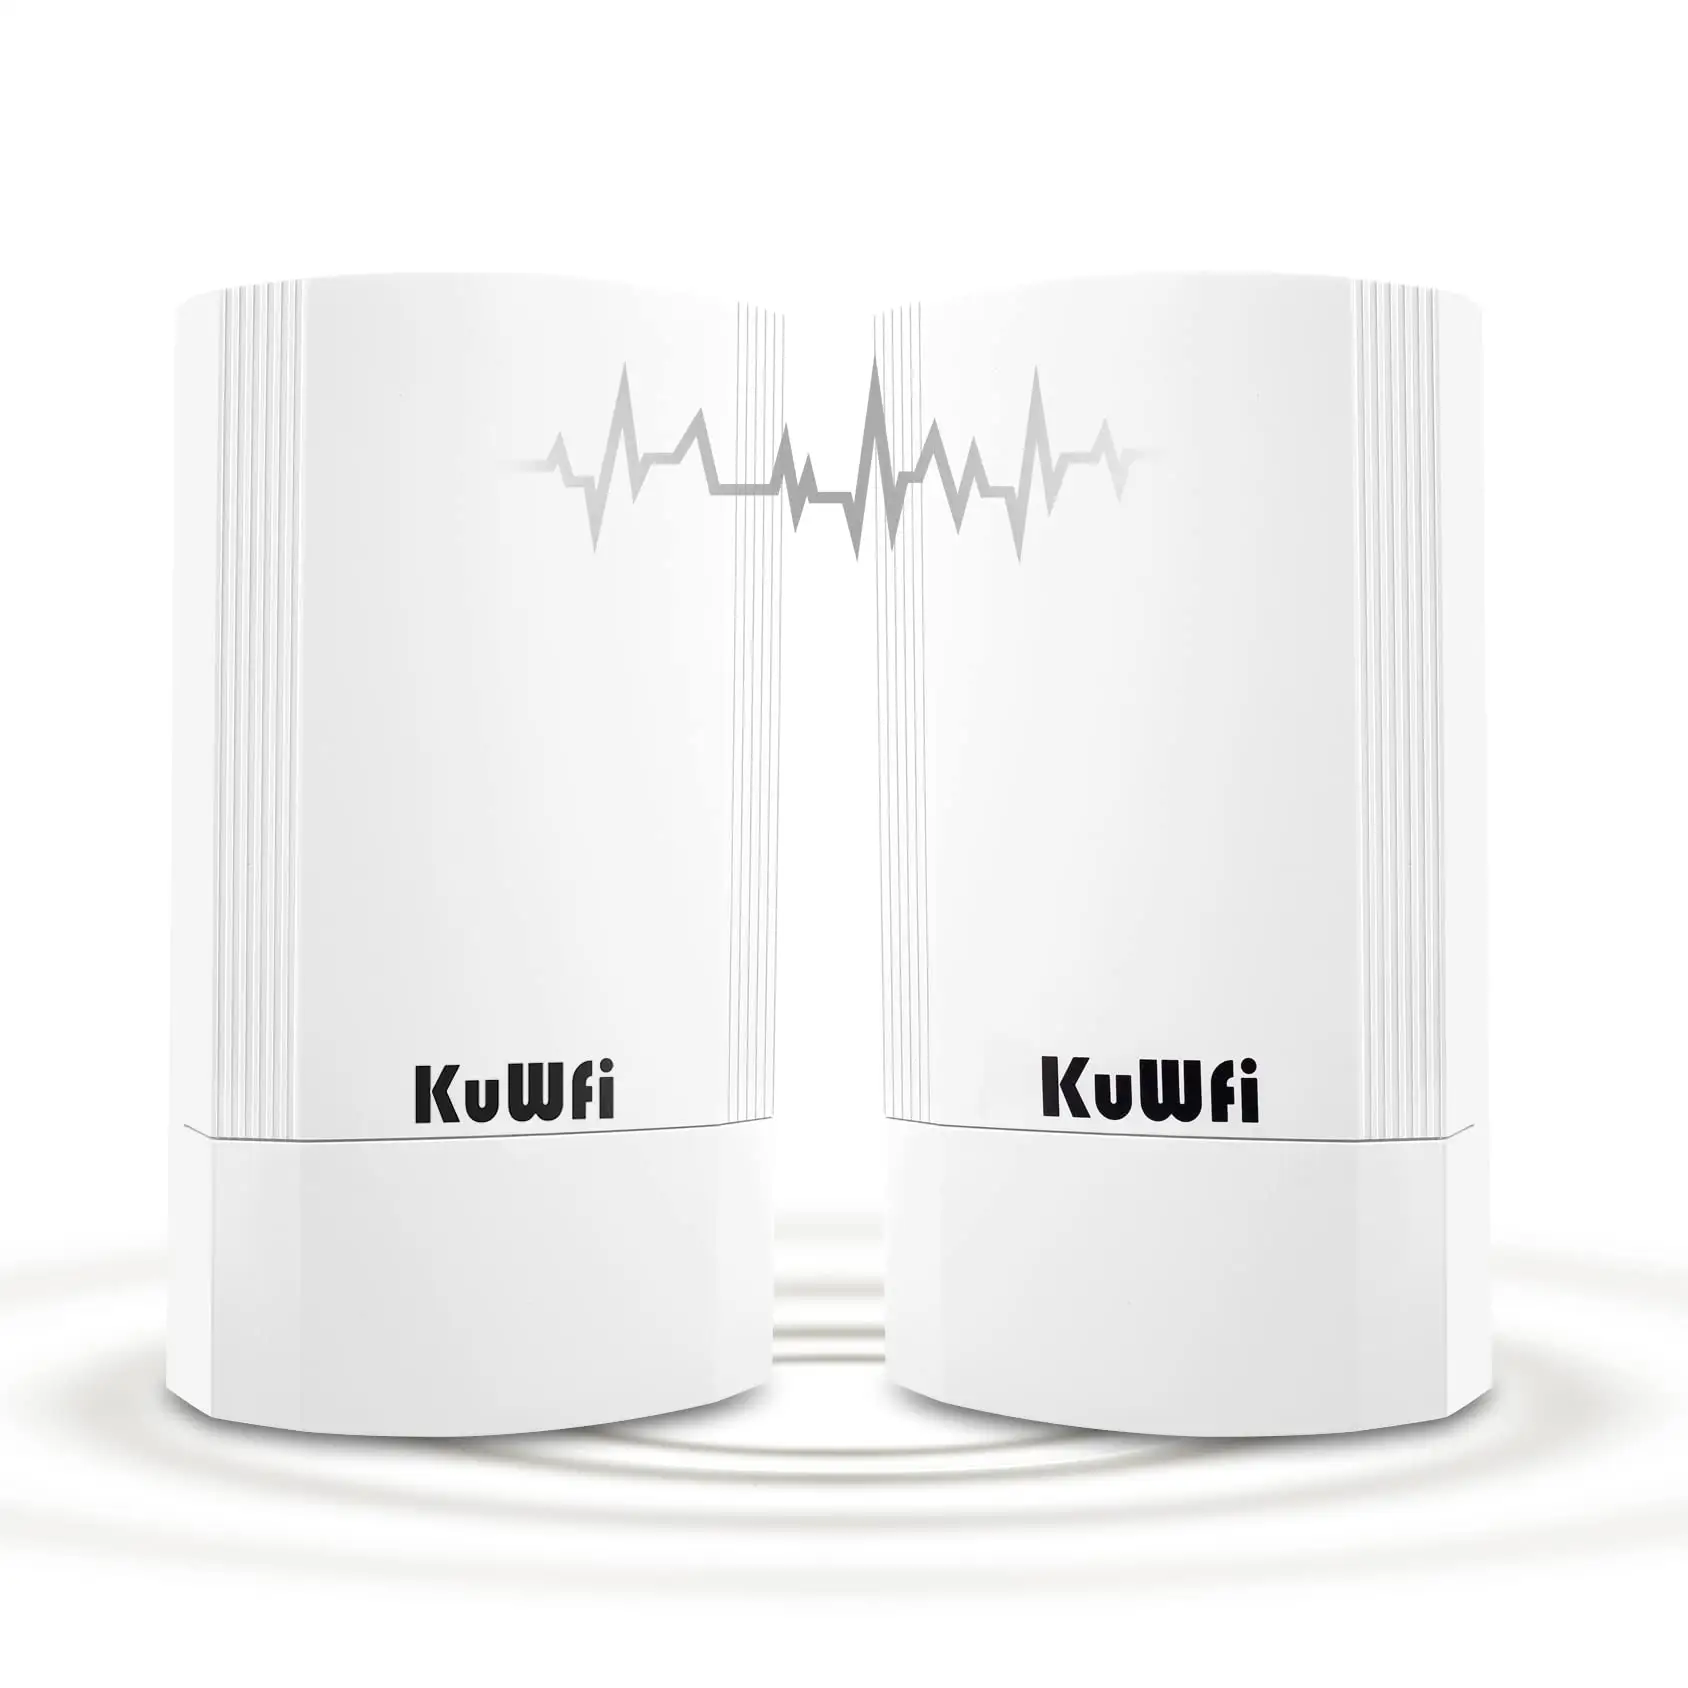 KuWFi 900Mbps CPE 5.8G Wireless Repeater AP Router Bridge Point To Point 3KM Waterproof 4G Wireless Wifi Bridge For Outdoor